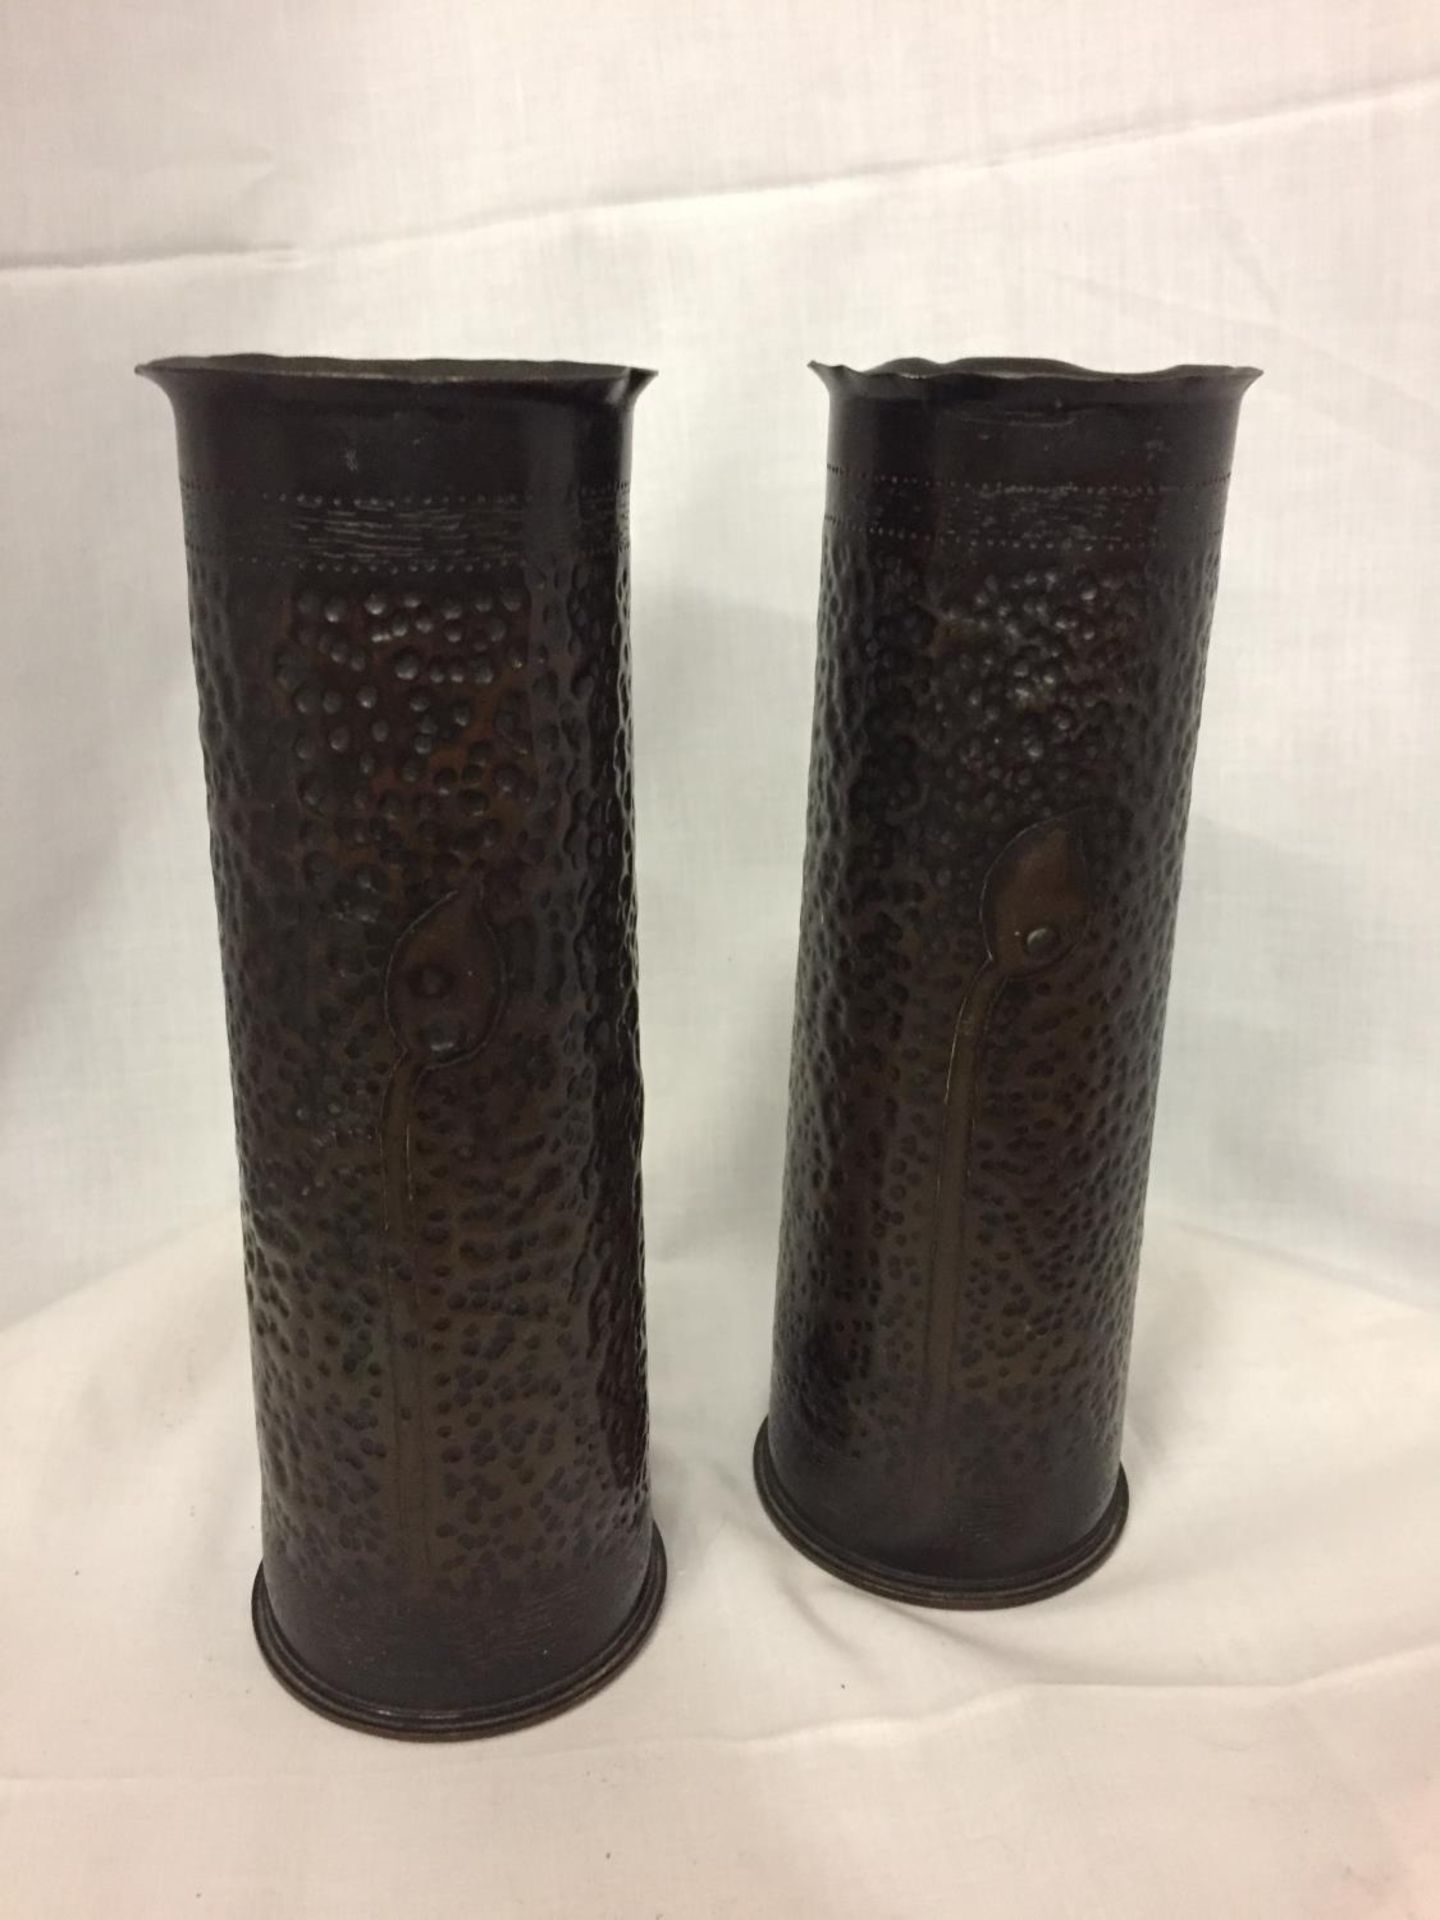 A PAIR OF DECORATIVE TRENCH ART CASES